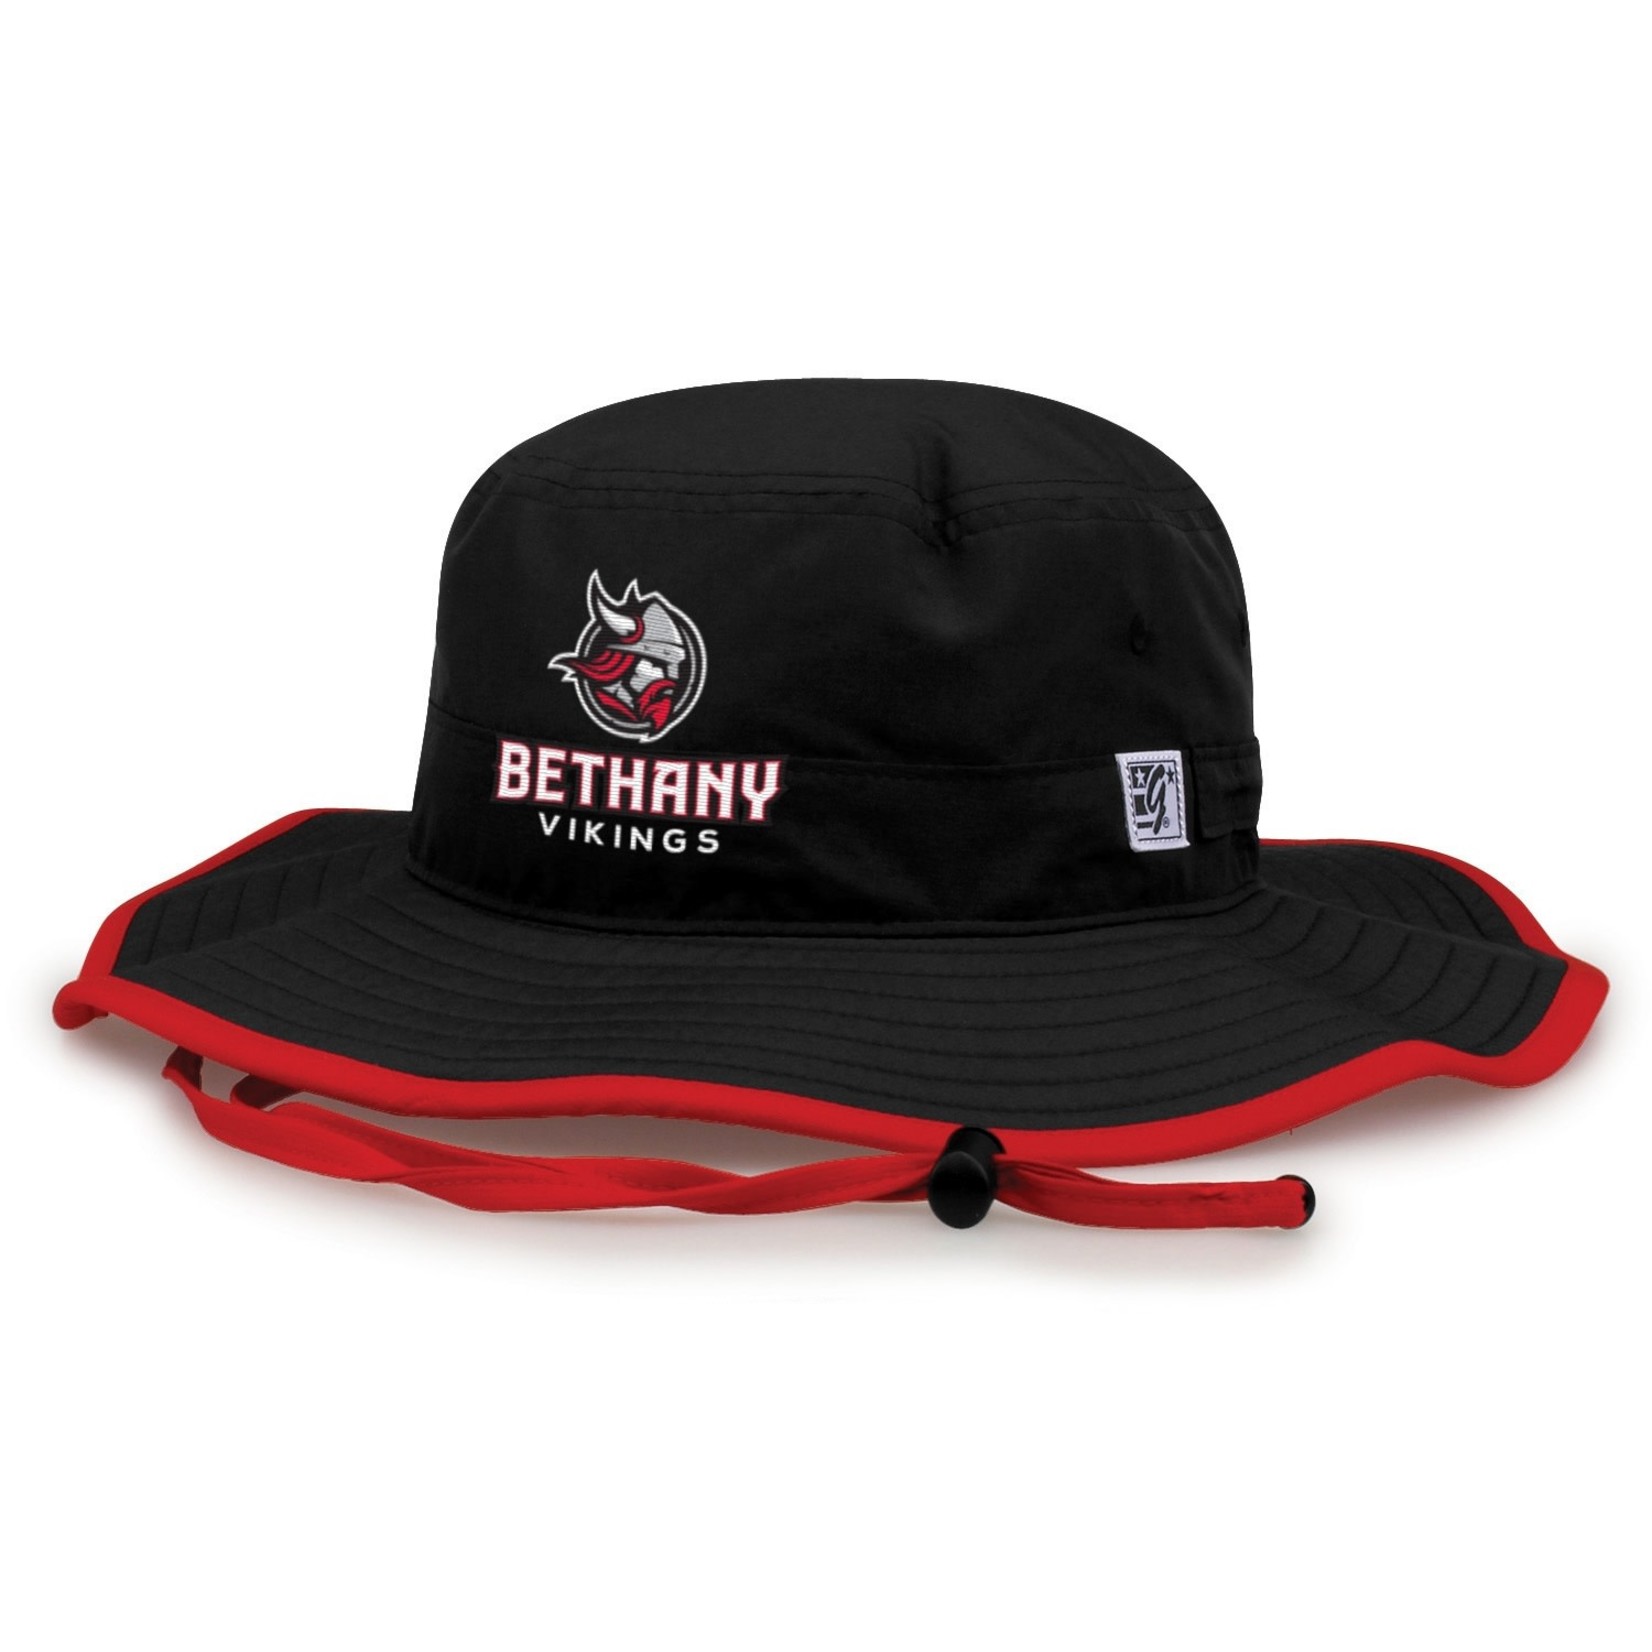 Bethany Vikings Bucket Hat with String